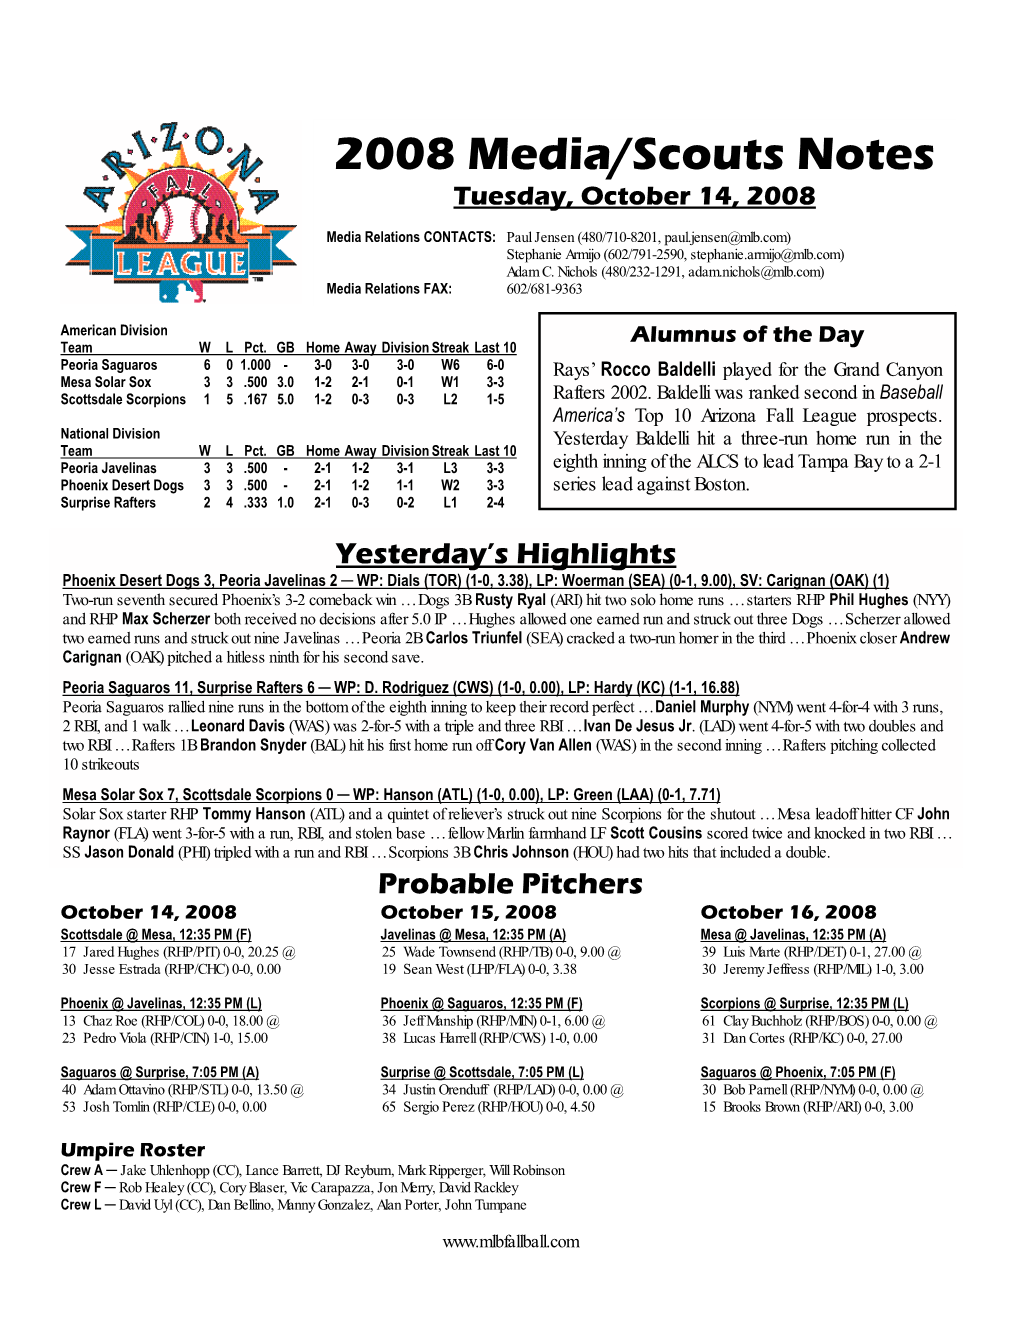 2008 Media/Scouts Notes Tuesday, October 14, 2008